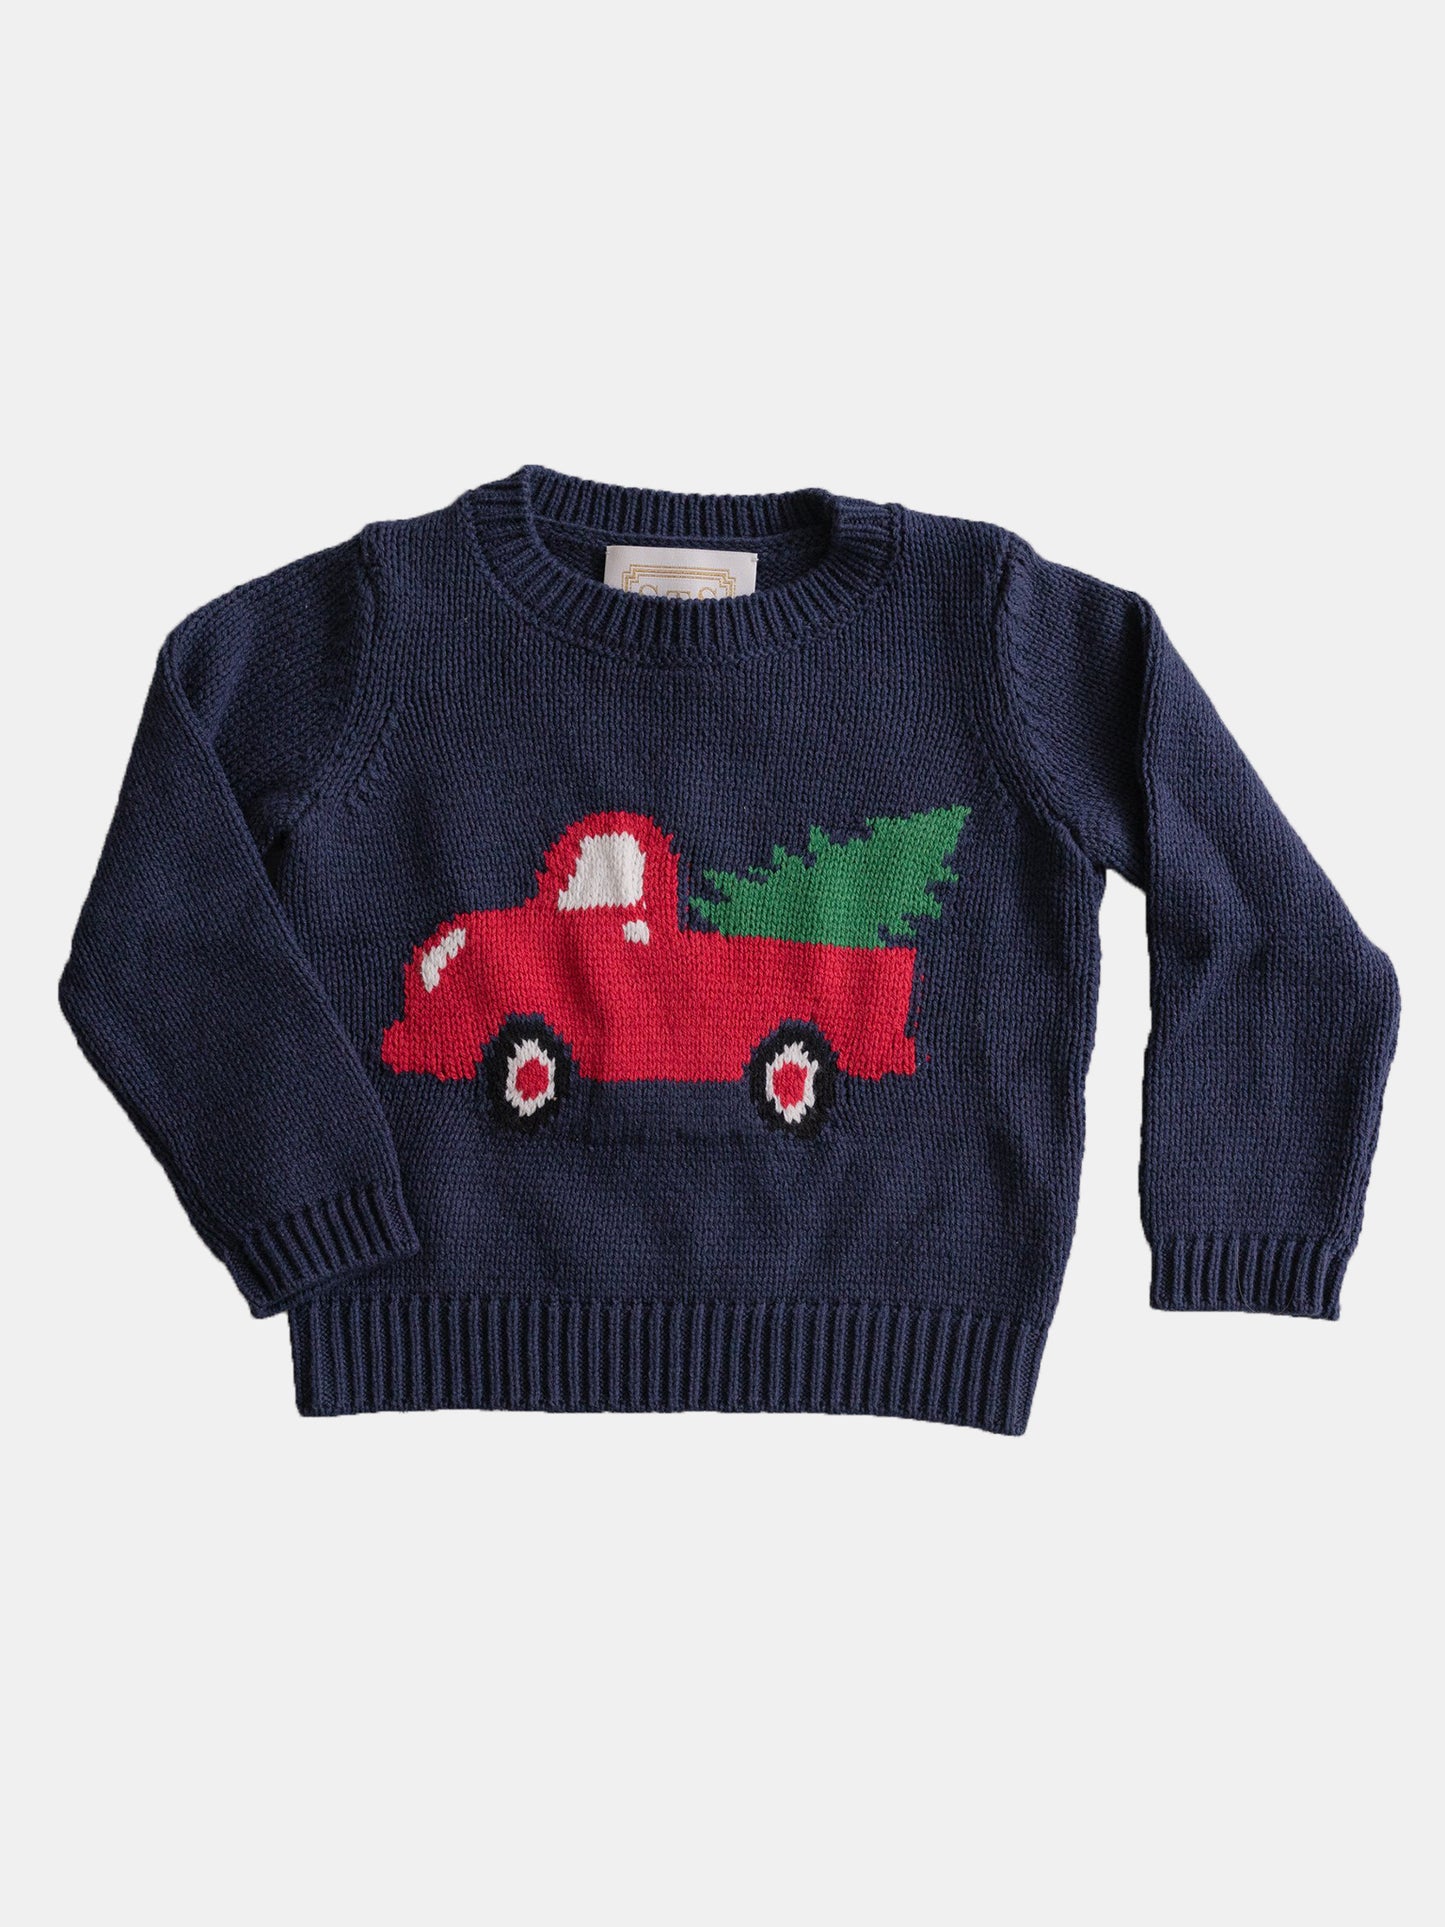 Sail to Sable Boys' Truck and Tree Sweater